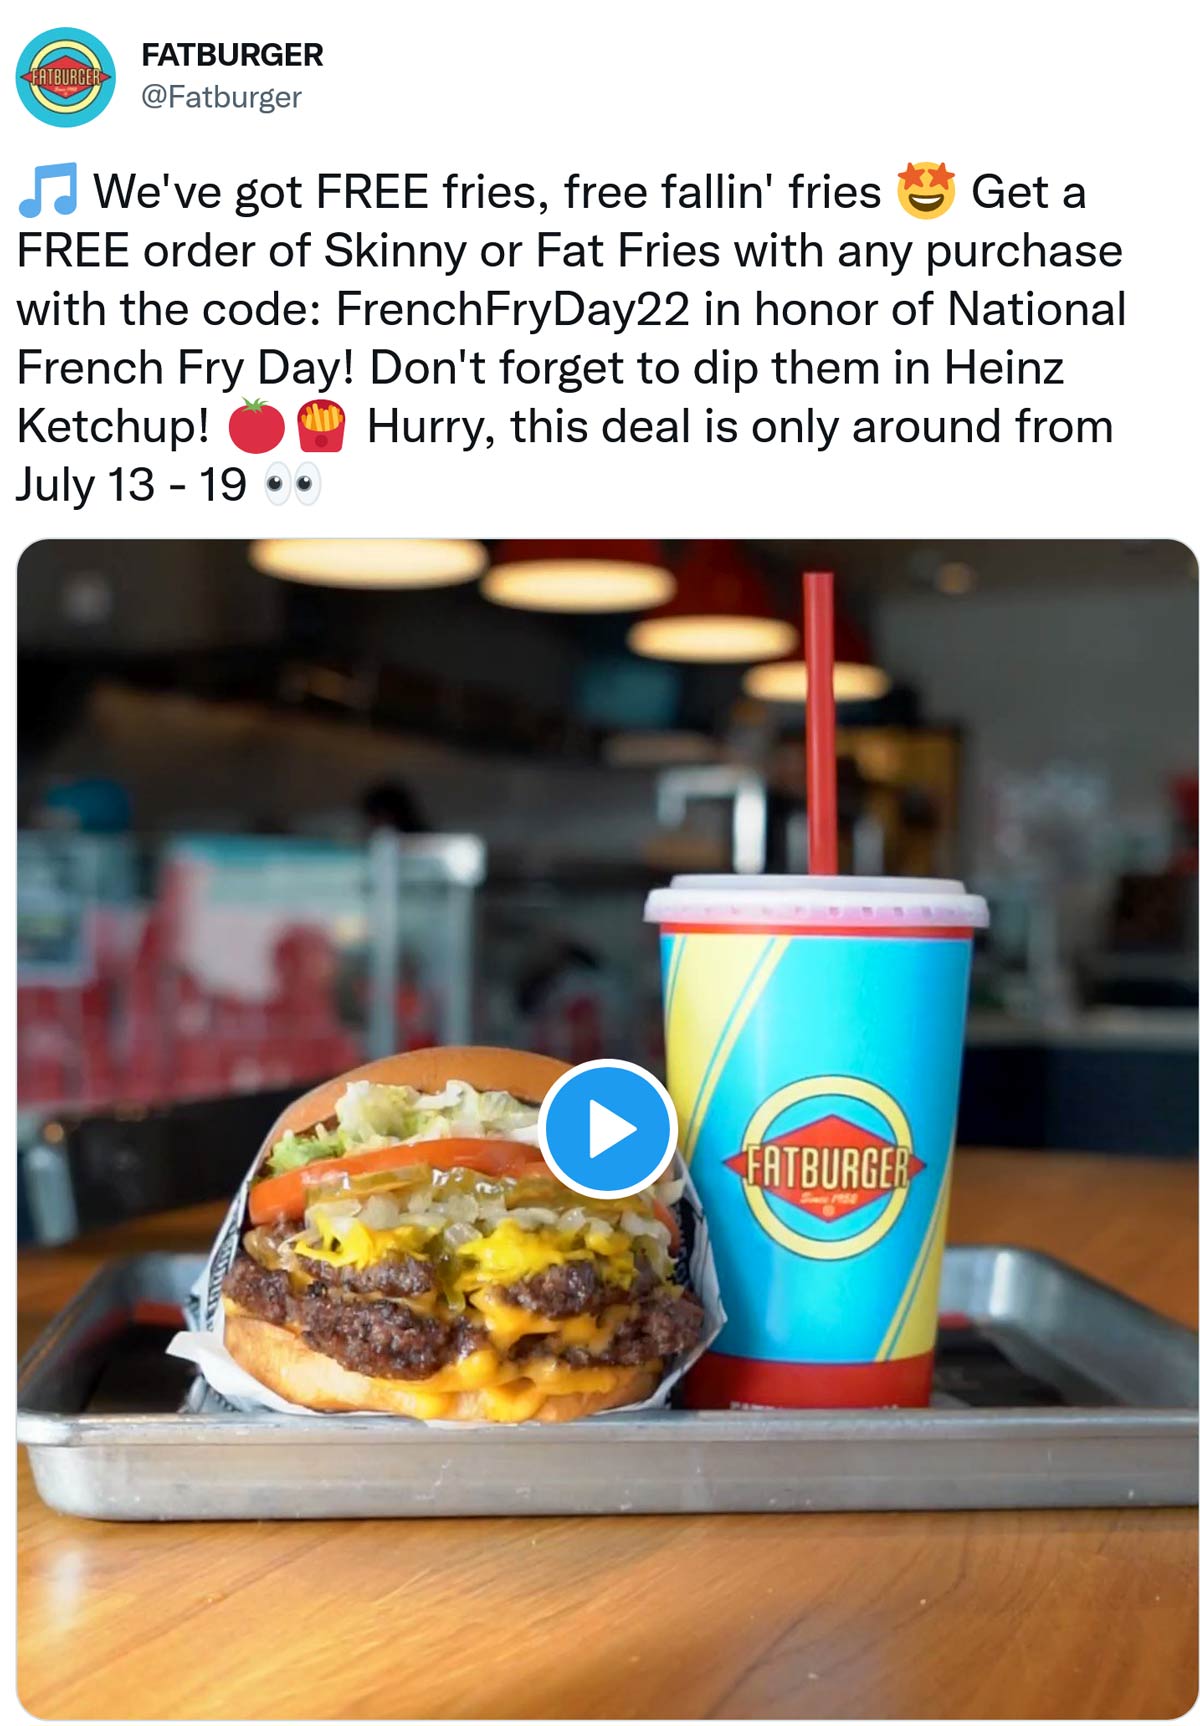 Fatburger restaurants Coupon  Free fries with your order at Fatburger restaurants via promo code FrenchFryDay22 #fatburger 